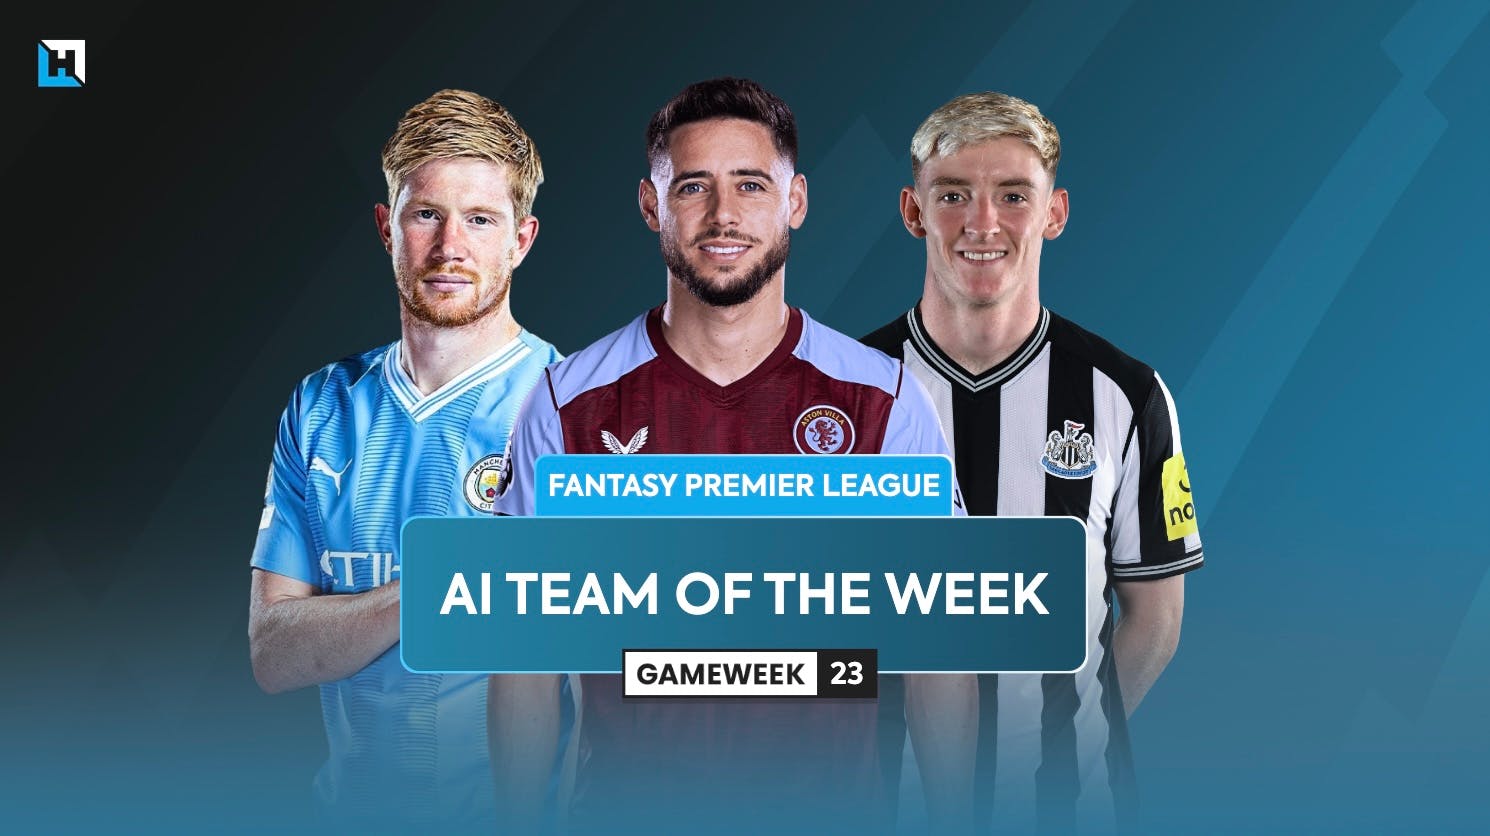 The best FPL team for Gameweek 23 according to Hub AI